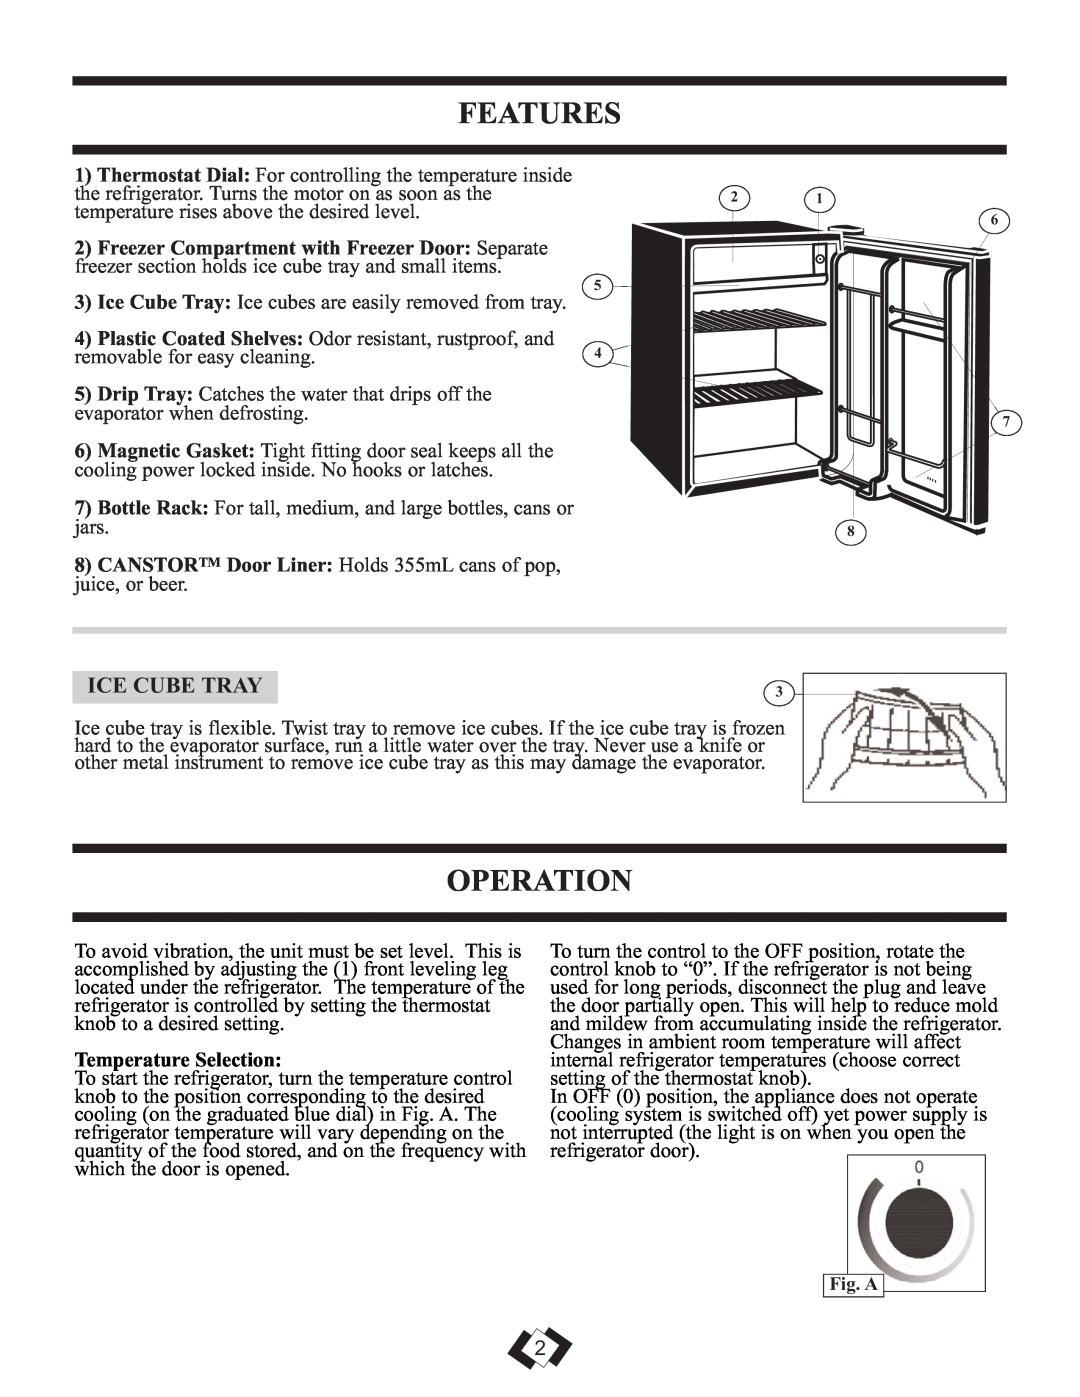 Danby DCRM71BLDB installation instructions Features, Operation, Ice Cube Tray, Temperature Selection 